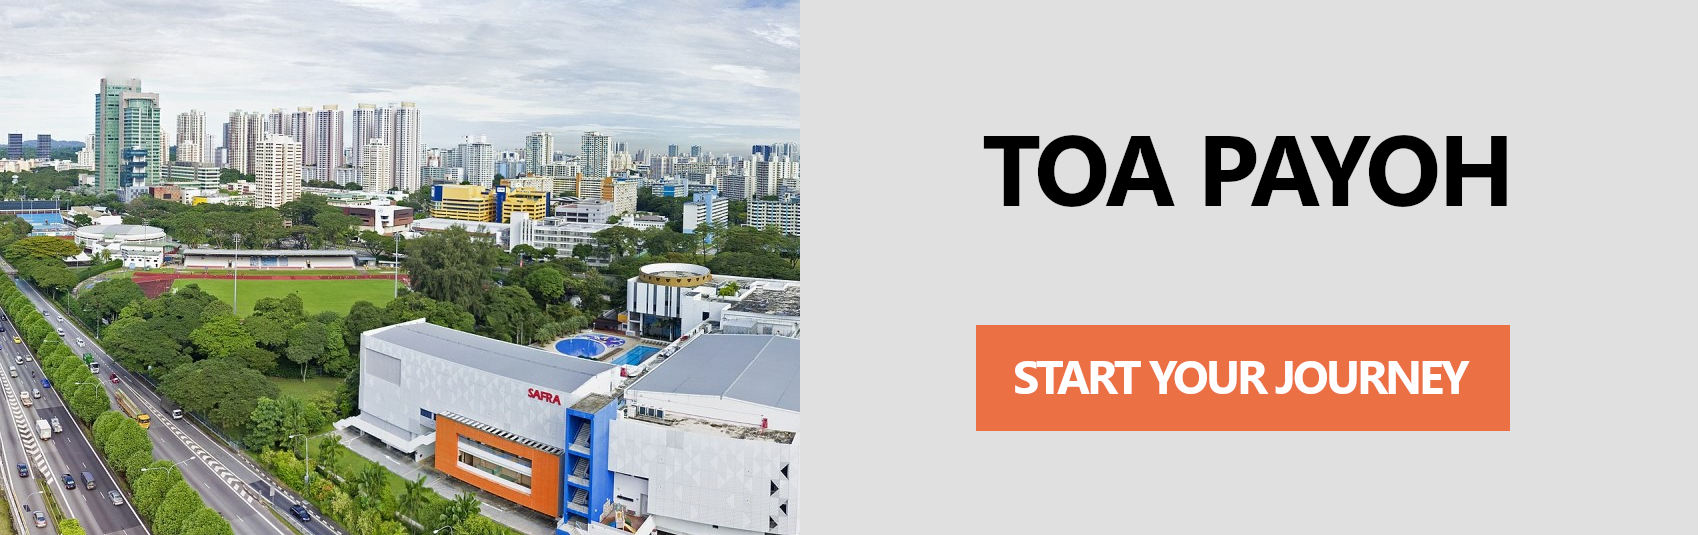 Toa Payoh Story Map